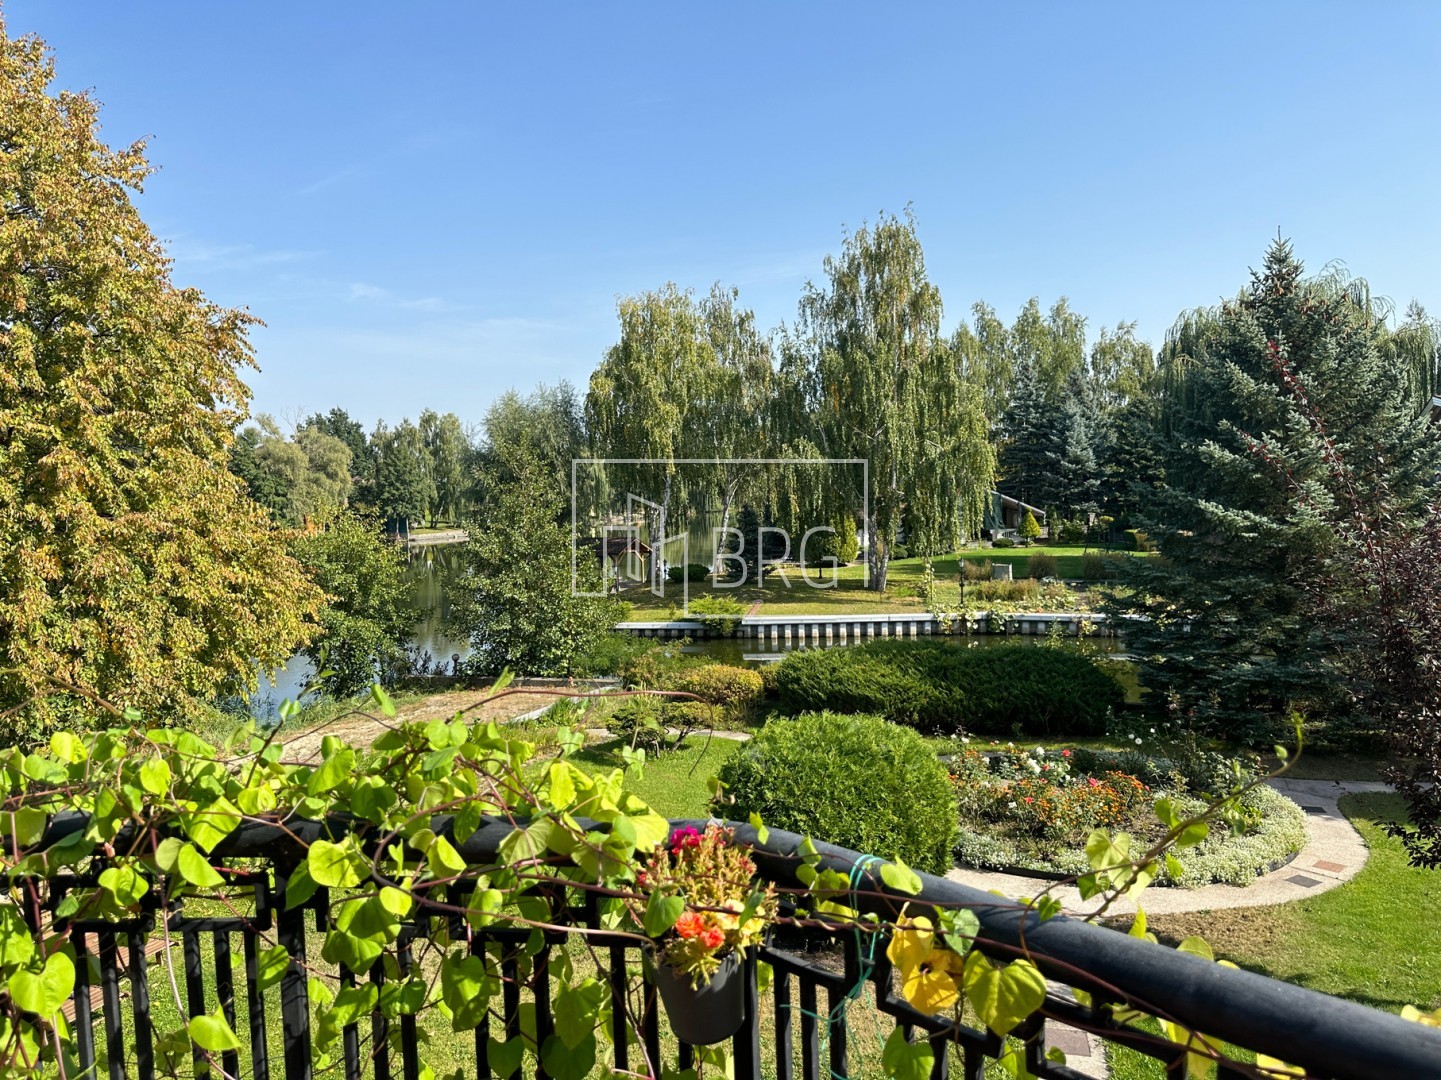 House KG Golden Gate 536m with a tennis court and access to the river Kozinka. Kiev region